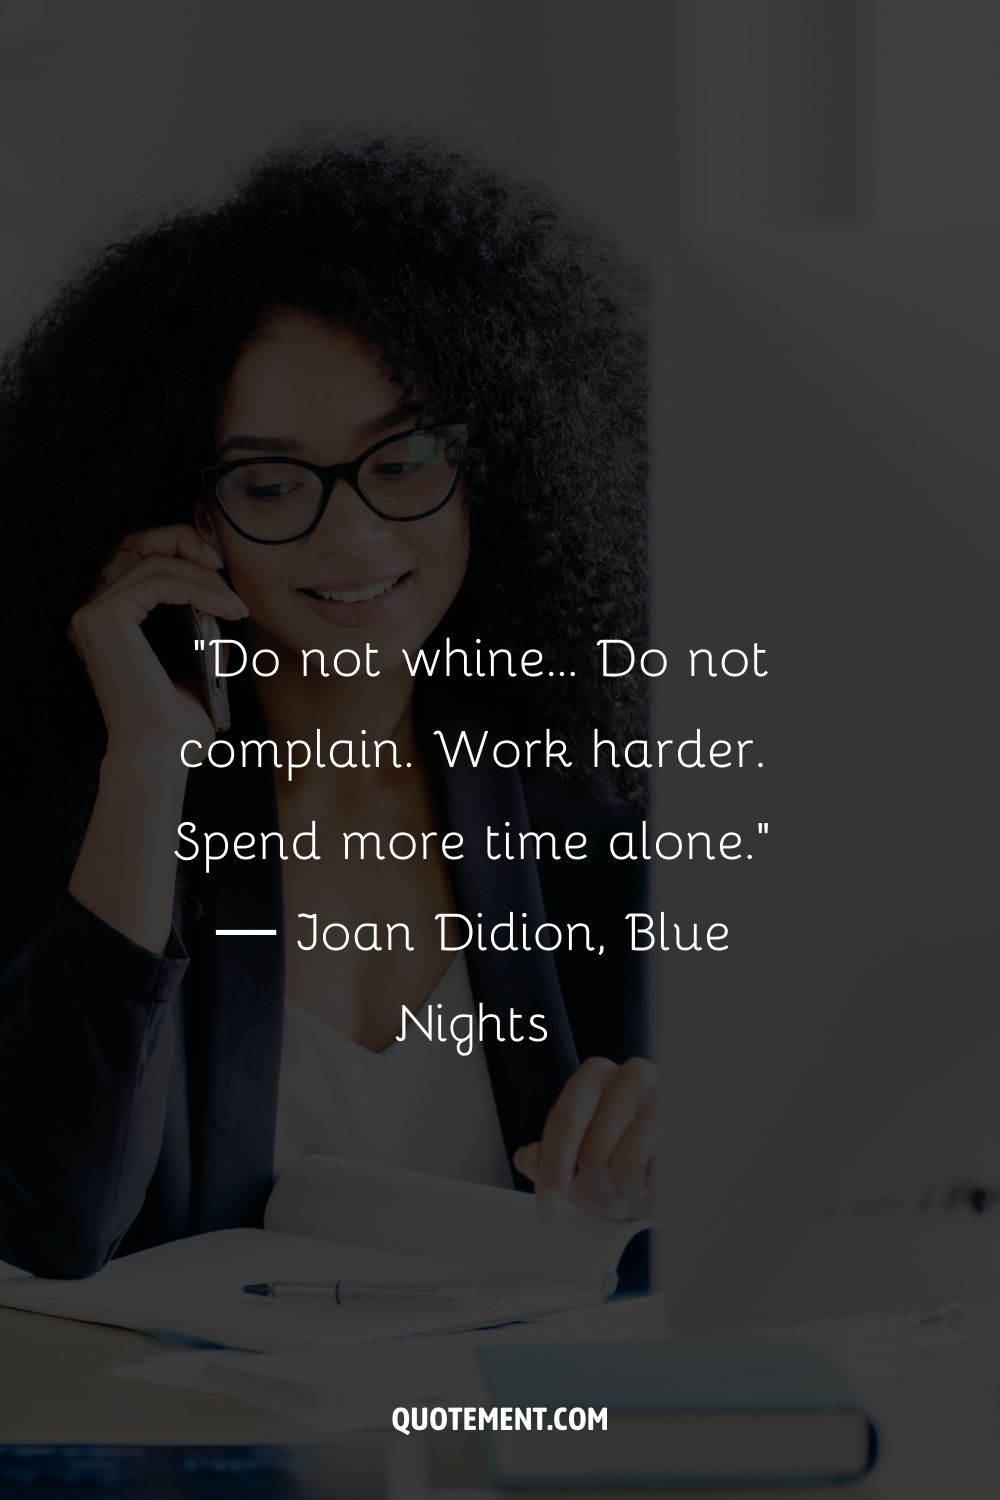 “Do not whine... Do not complain. Work harder. Spend more time alone.” ― Joan Didion, Blue Nights